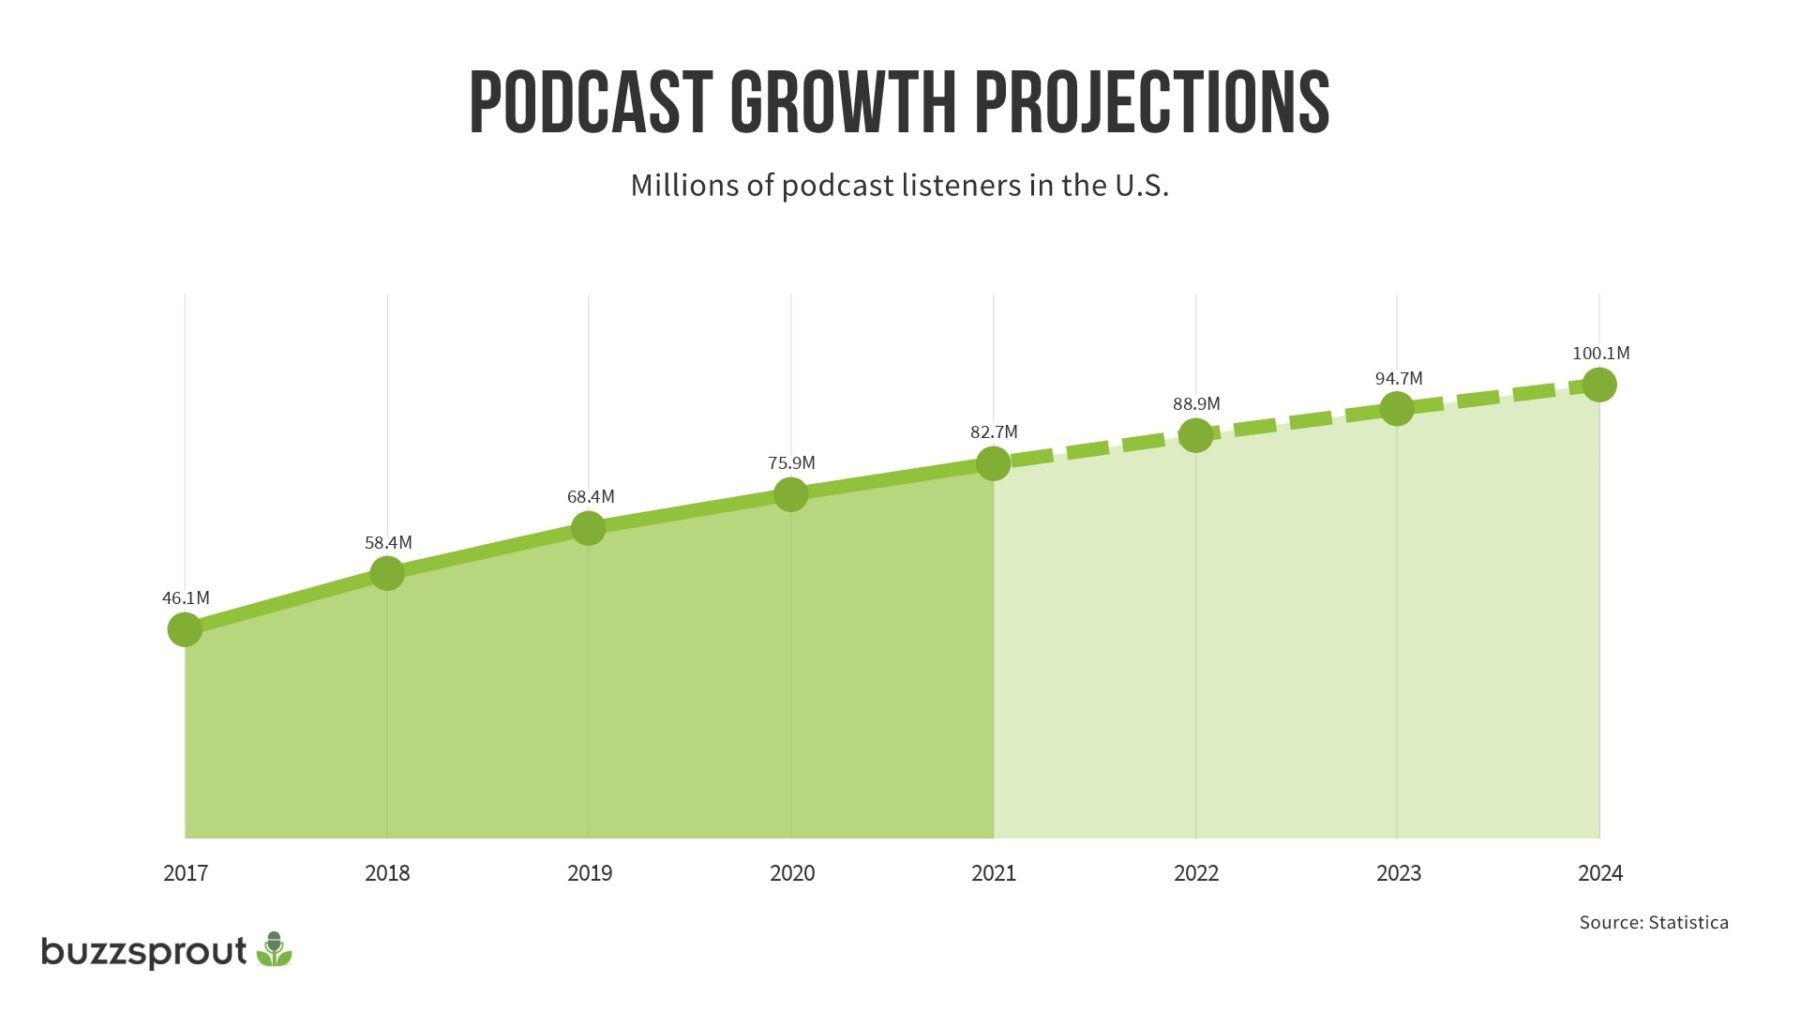 Podcast audience forecast by Buzzsprout: Significant opportunity to reach an engaged B2B audience. 